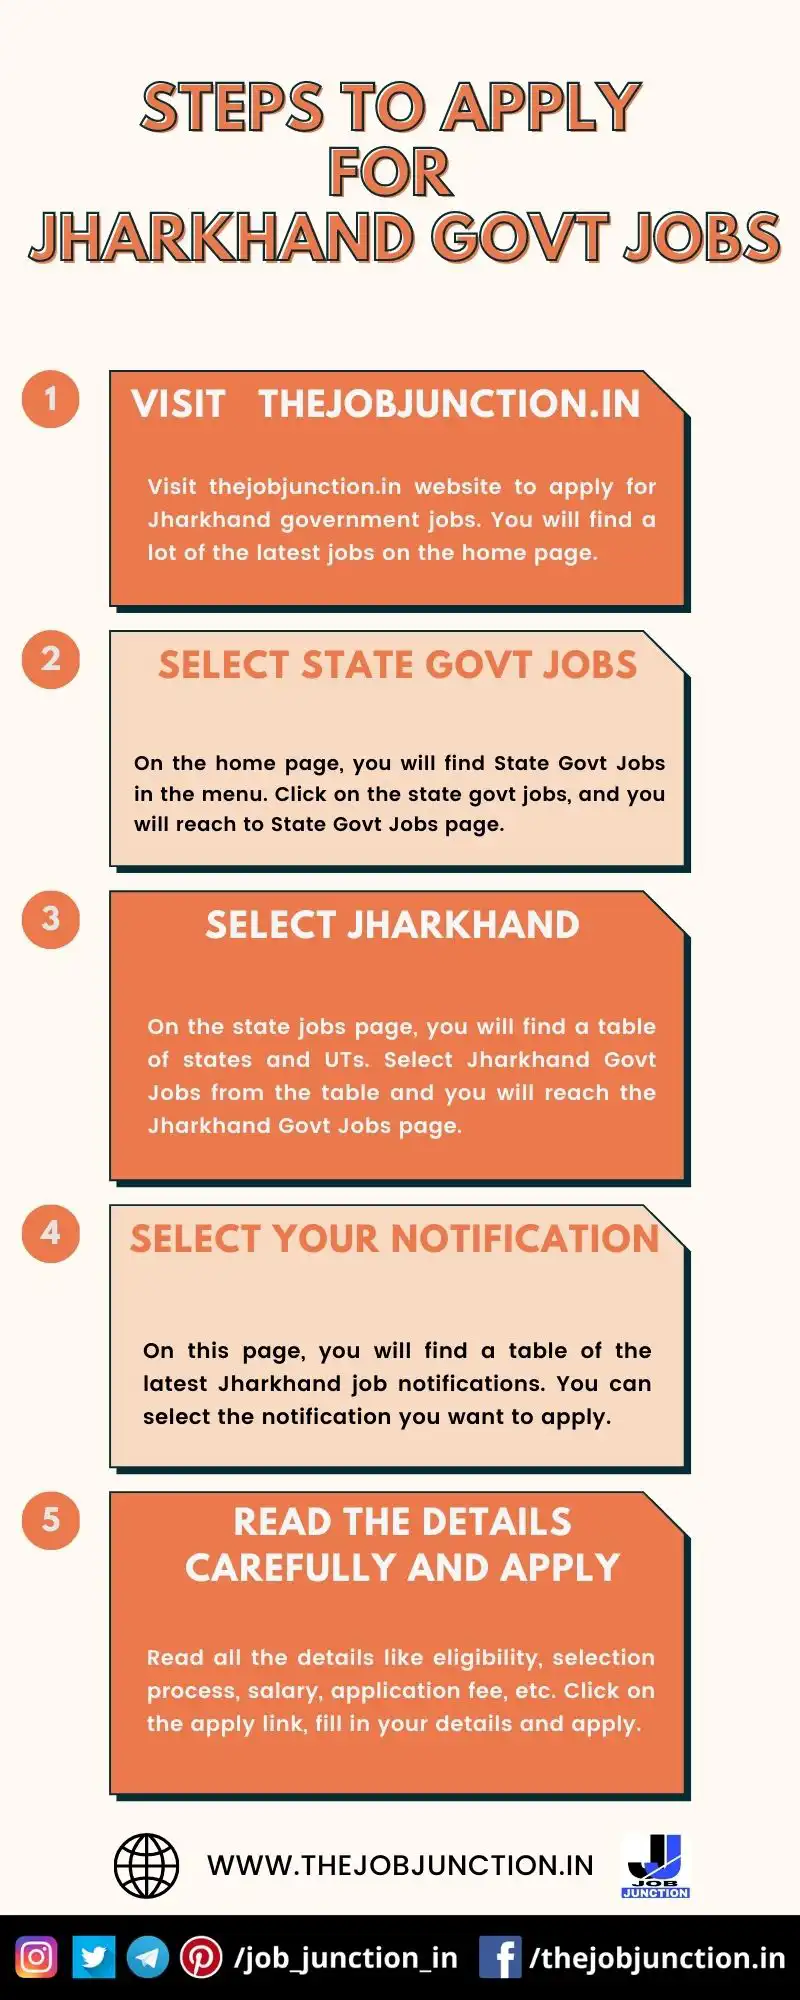 STEPS TO APPLY FOR JHARKHAND GOVT JOBS